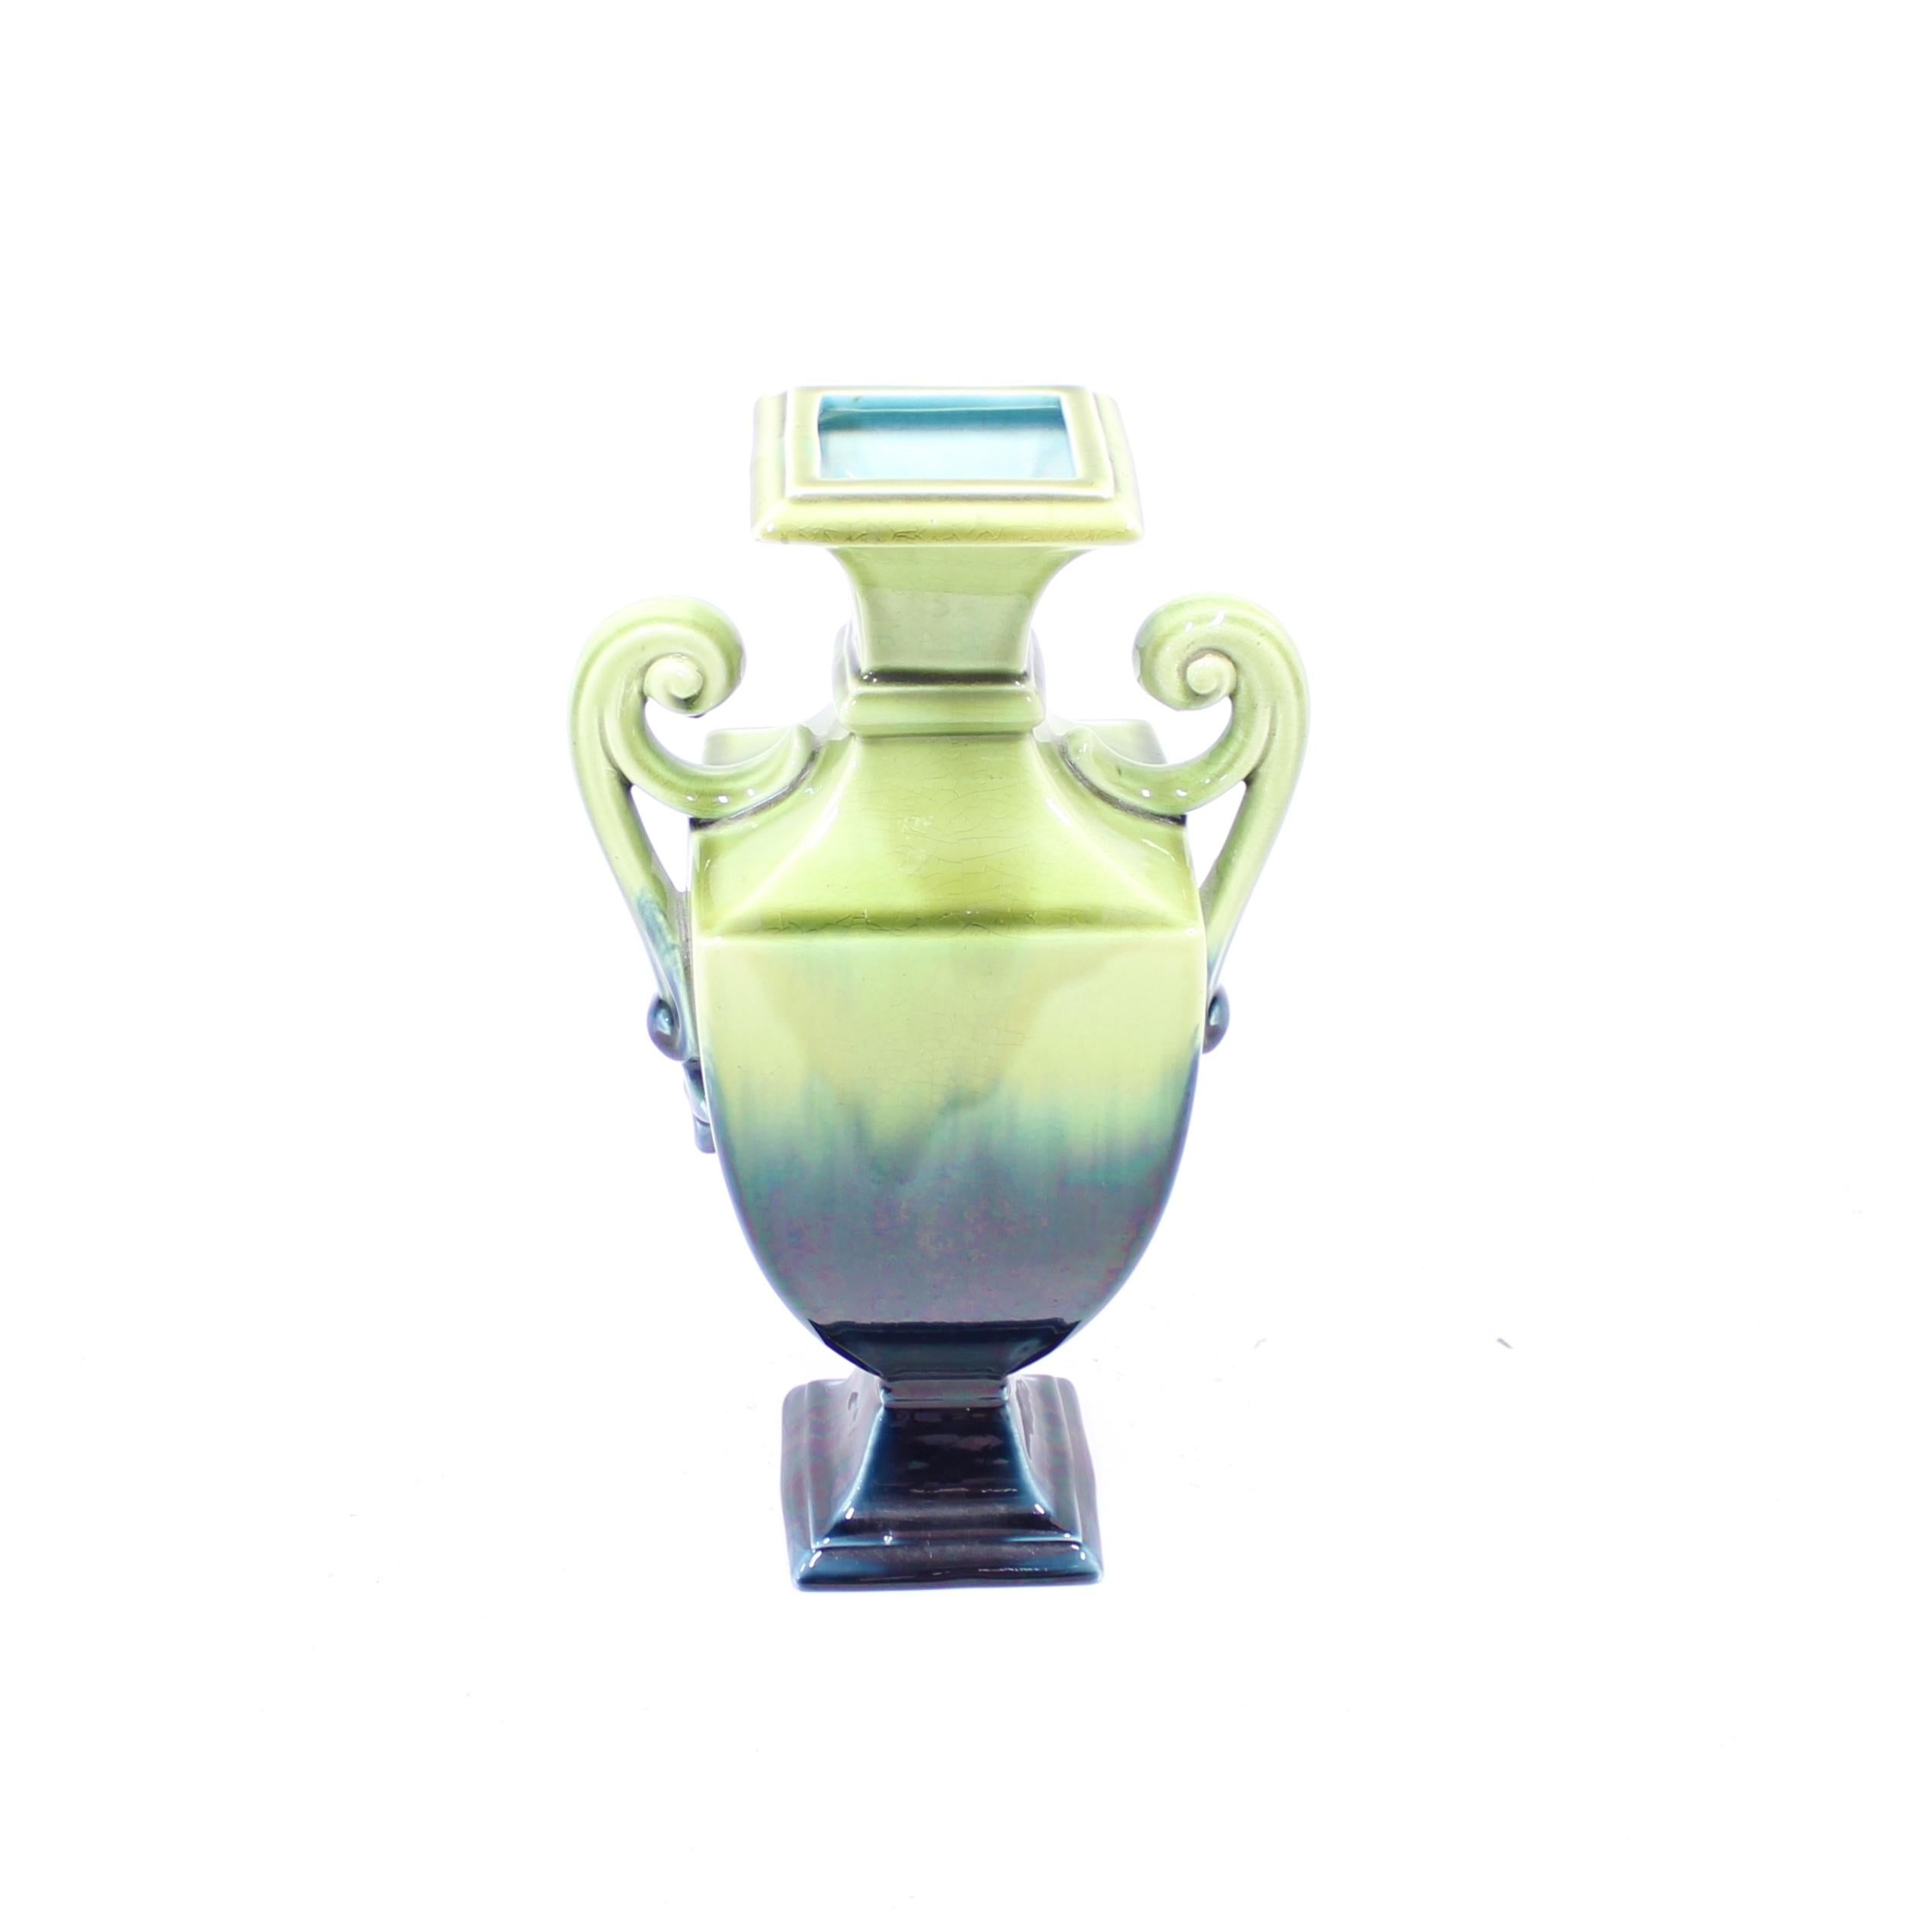 Large creamware vase / urn manufactured by Swedish porcelain gigant Rörstrand in the early part of the 20th century. It has a green/blue glaze that fades from a dark to light. Inside with turquoise glaze. Very good condition with very light ware